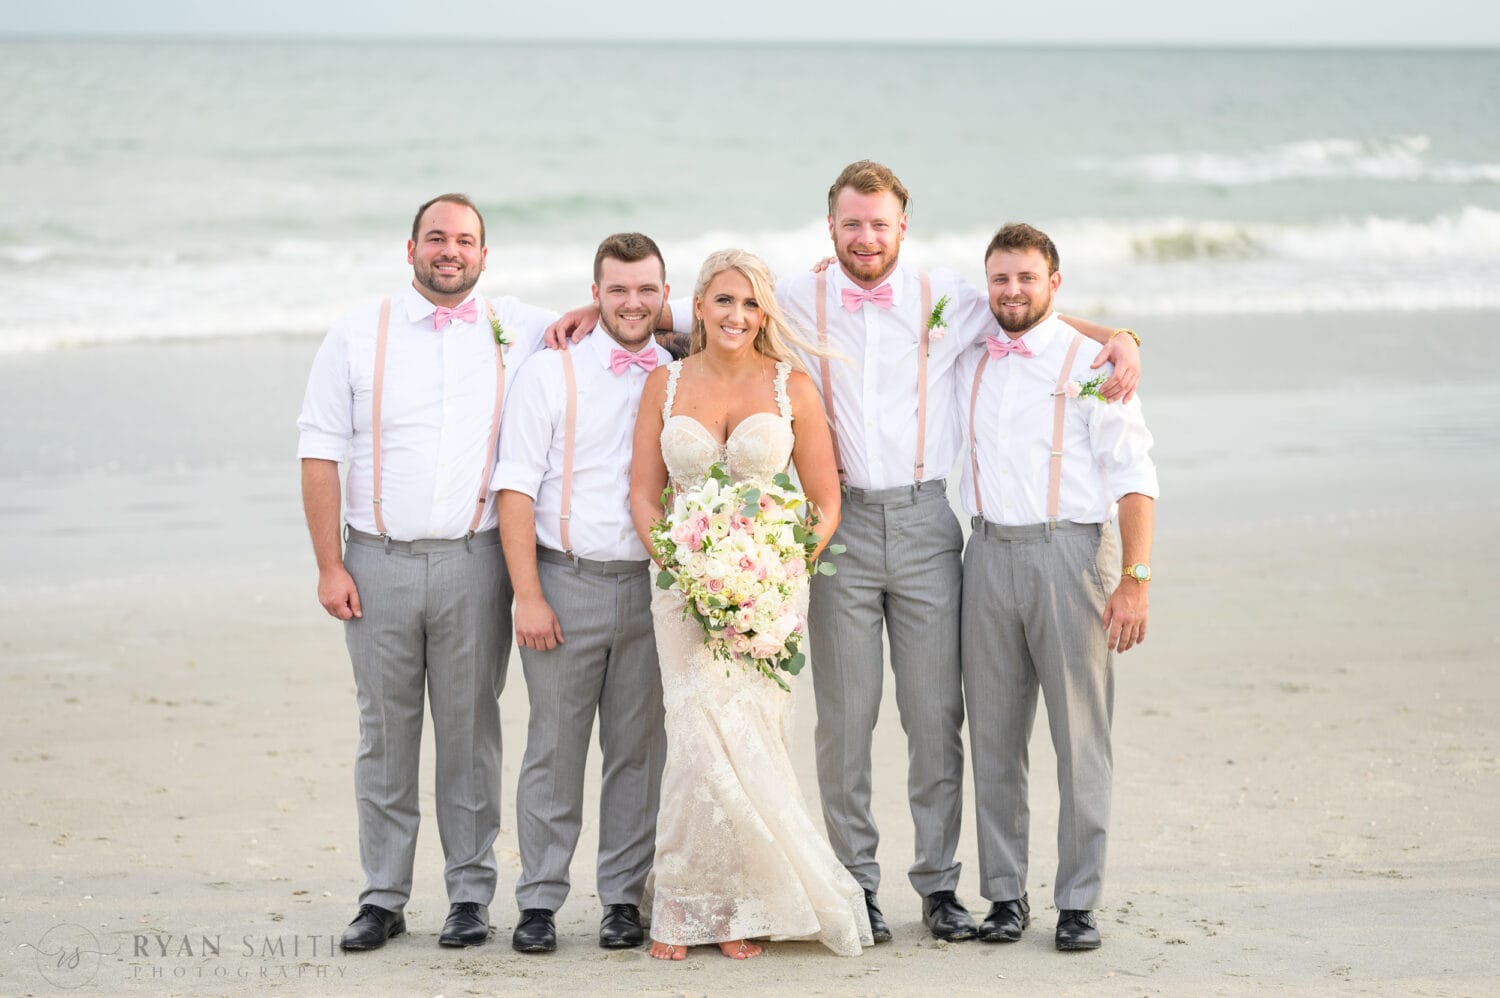 Bride with groomsmen - 21 Main Events at North Beach